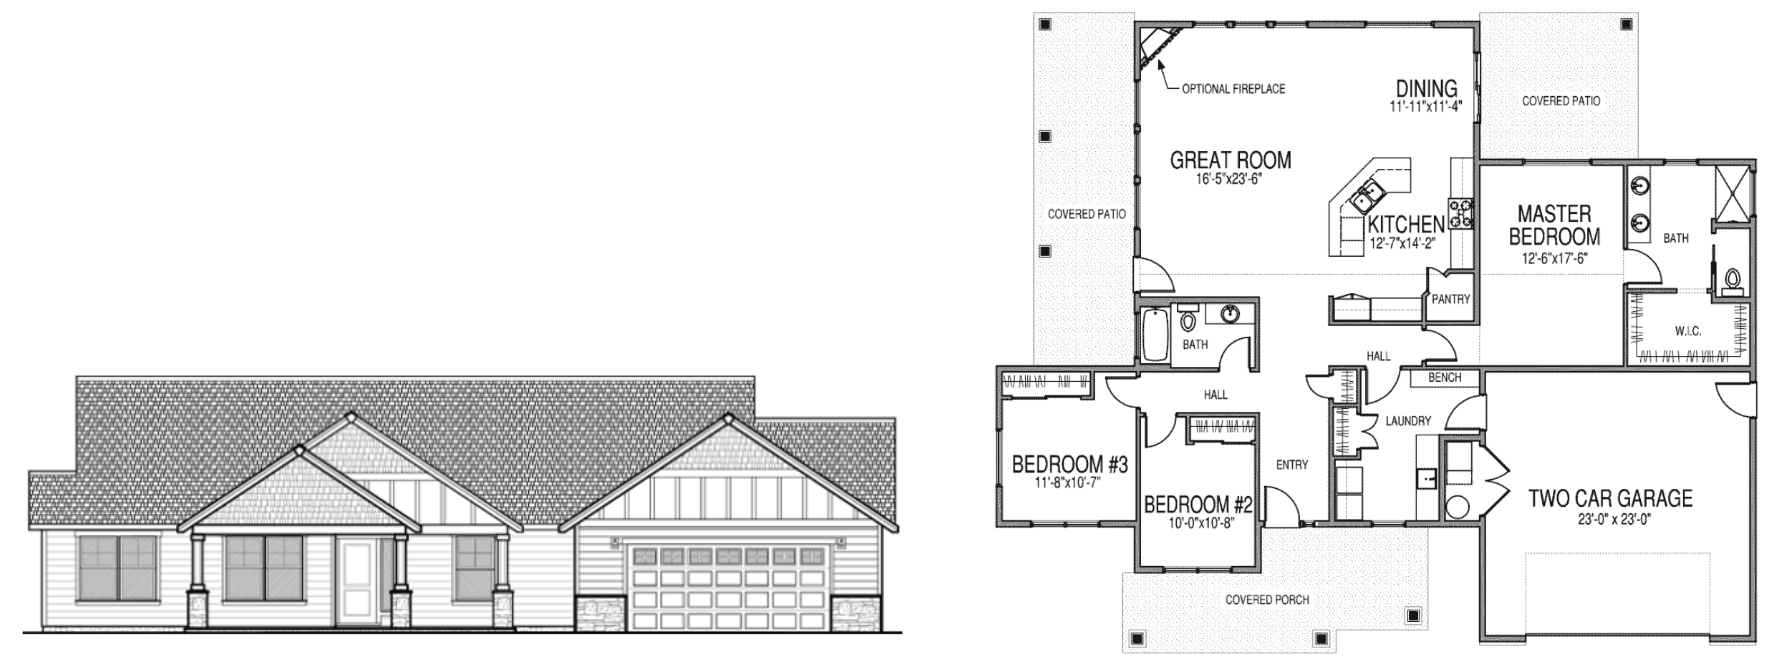 Monroe 1 single story home floor plan with a master bedroom with a walk in closet and bathroom, 2 additional bedrooms, another bathroom, a great room, dining space, kitchen, pantry, laundry room, double garage, and a covered porch and patio